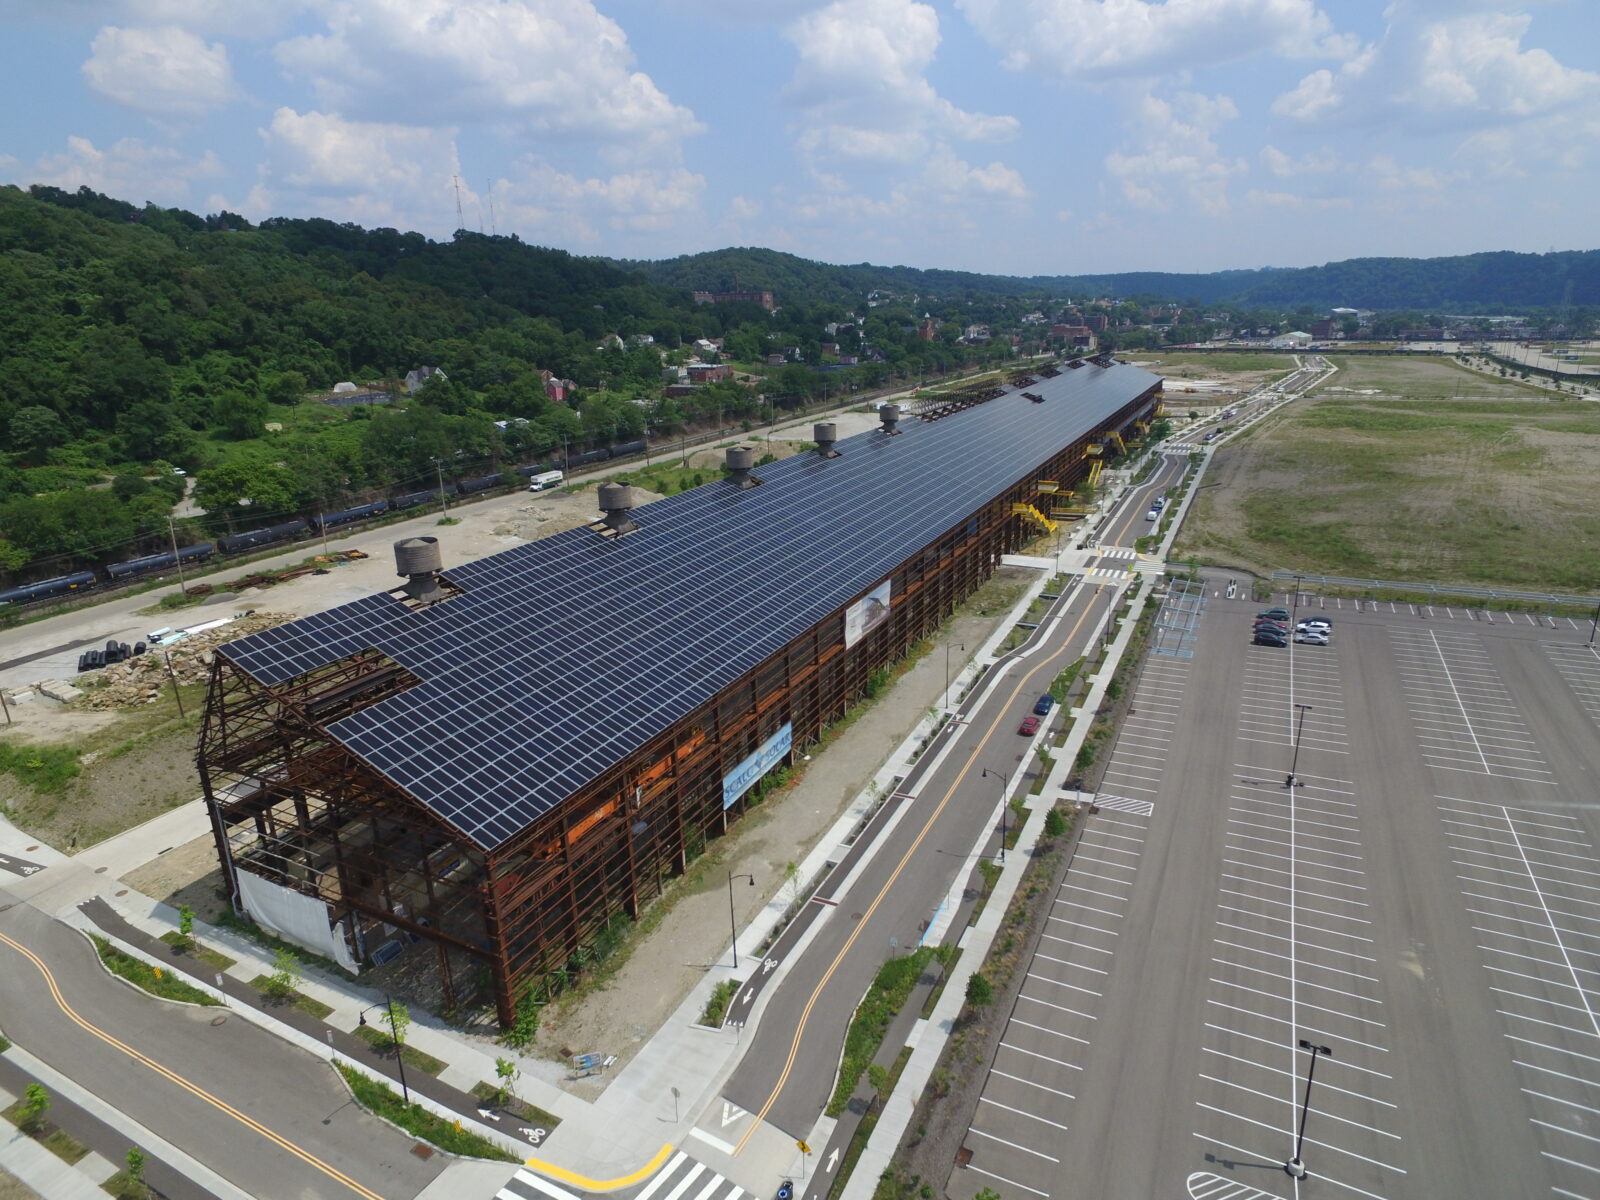 Mill 19, with its residential-style sloping ceiling instead of the flat ceiling more common on commercial buildings, is said to be the largest single-slope solar installation in the country. The former mill located along the Monongahela River in Pittsburgh now houses companies including Carnegie Mellon’s Advanced Robotics for Manufacturing. The nonprofit Regional Industrial Development Corporation operates Mill 19.(photograph provided by RIDC)